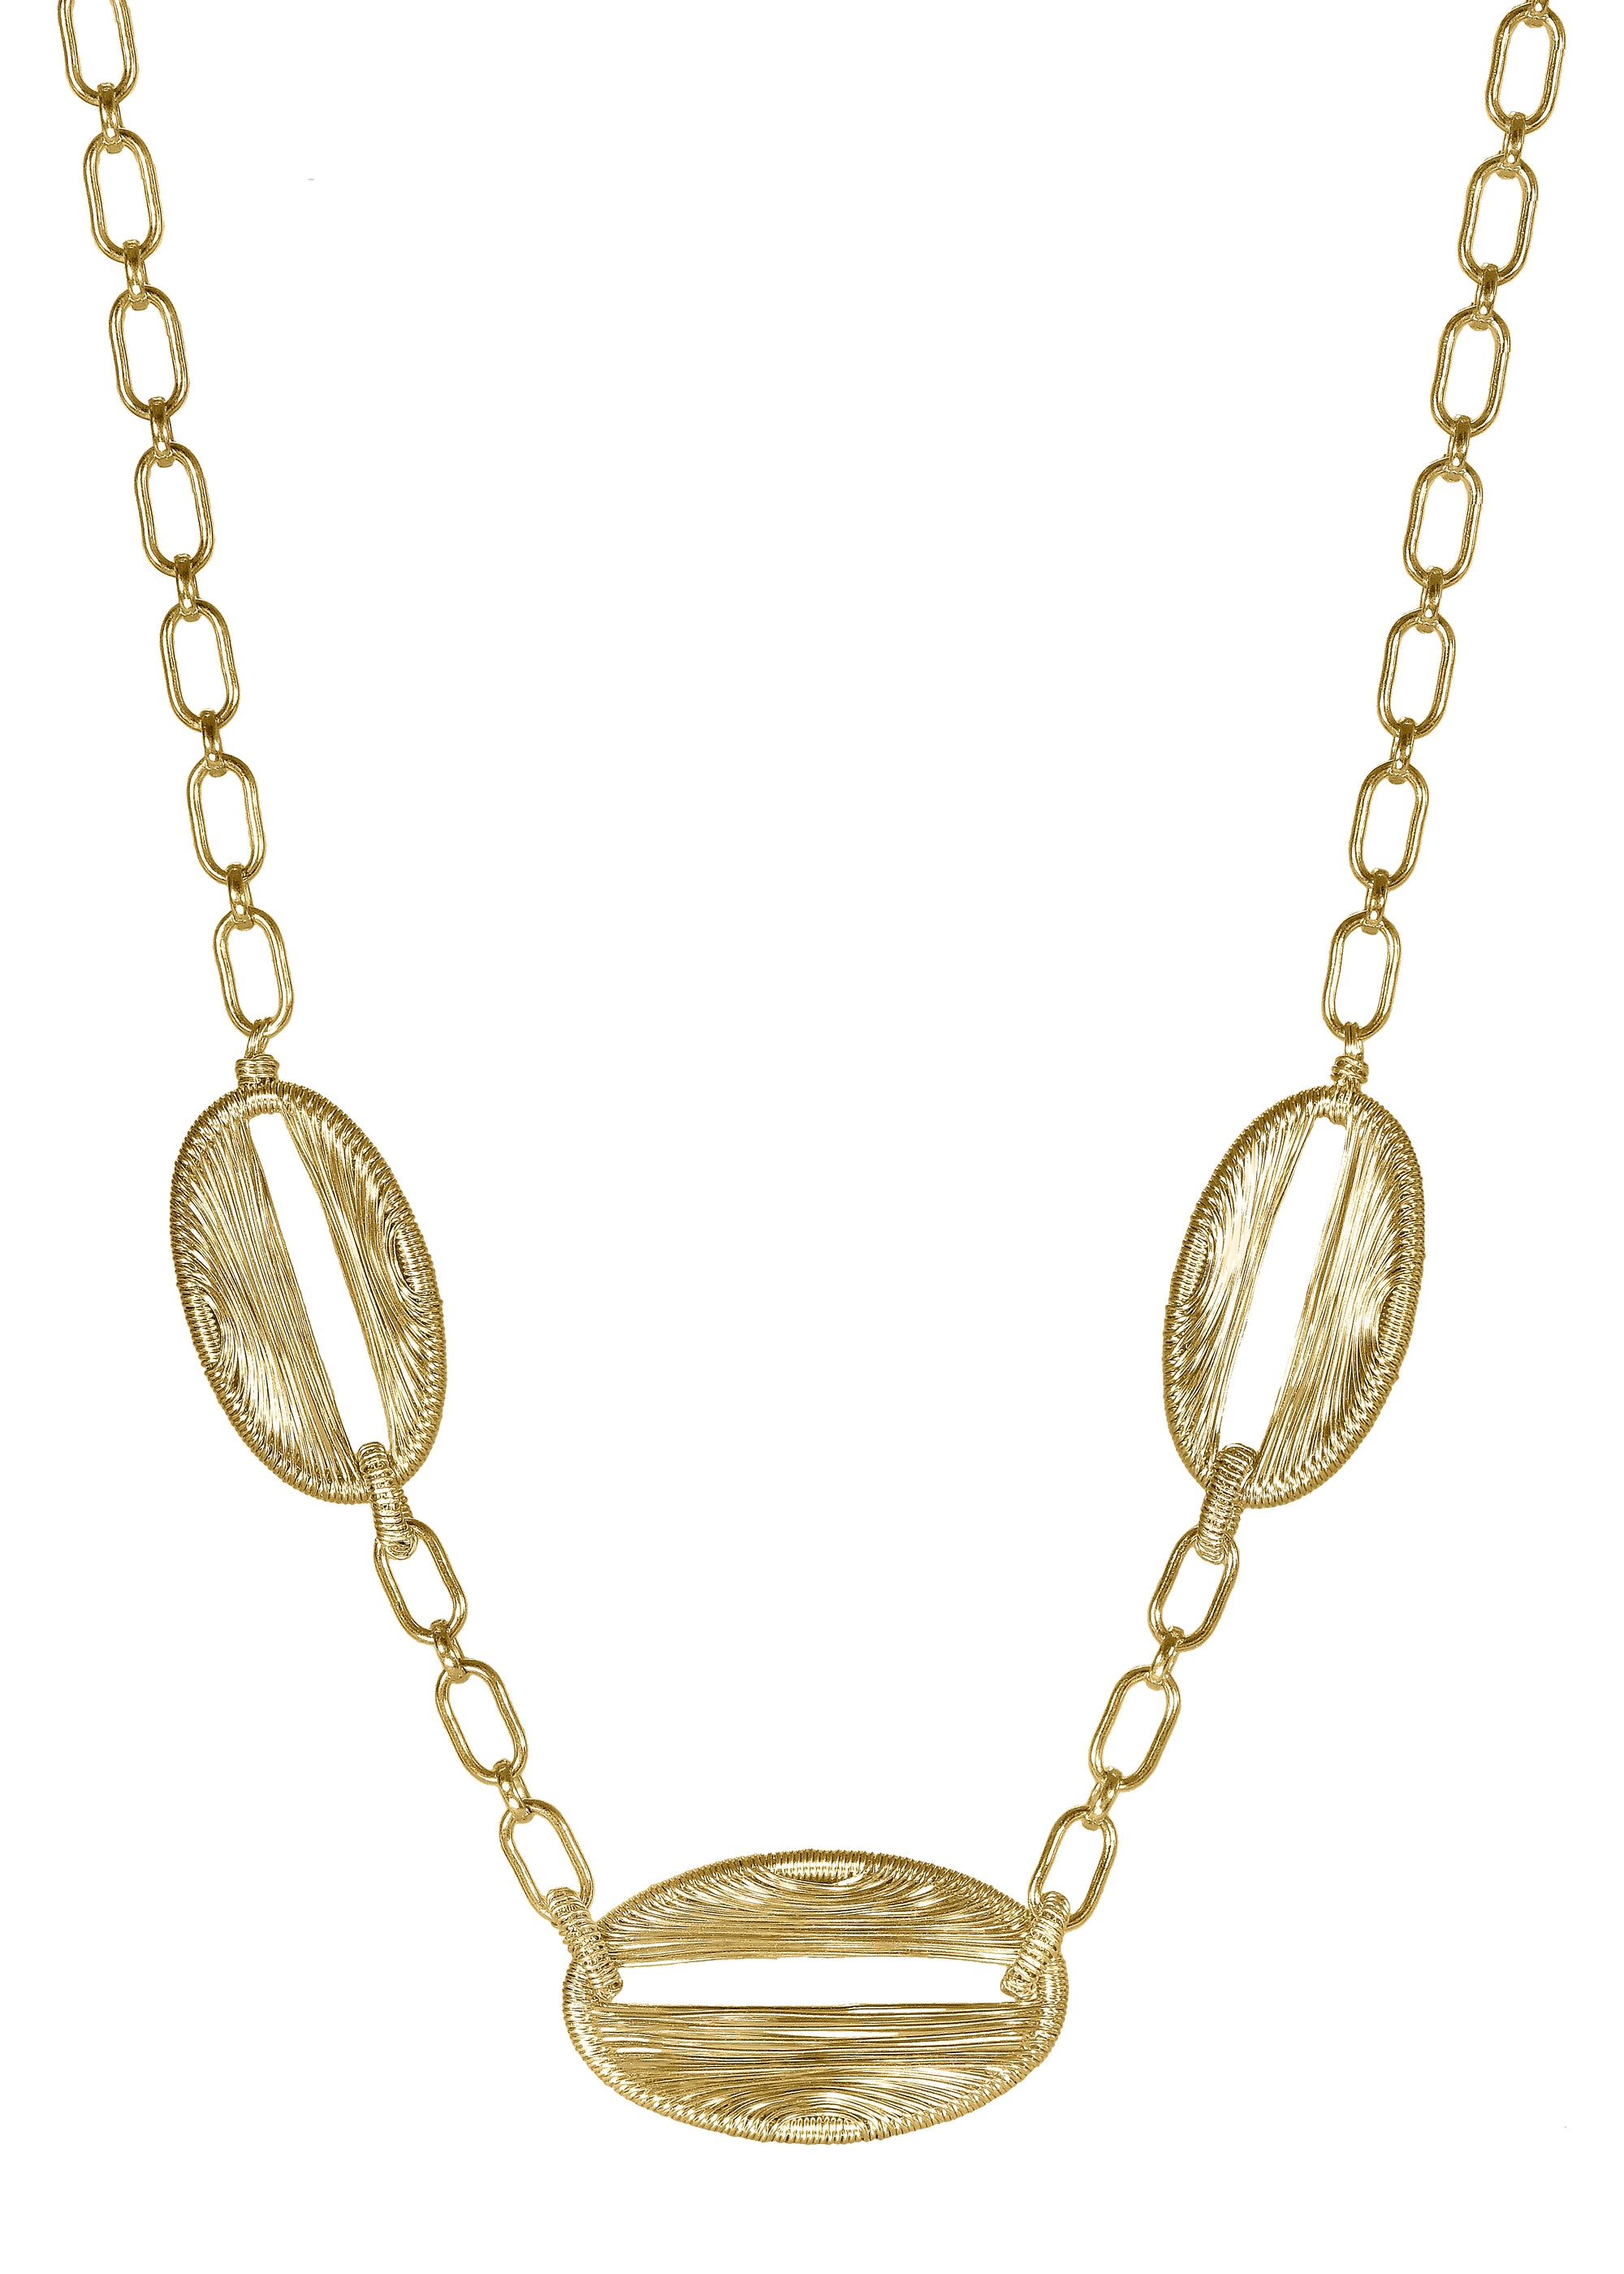 14k gold fill Necklace measures 17-1/4" in length Pendants measure 3/4" in length and 3/8" in width (x2), 1/2" in length and 1" in width (x1) Handmade in our Los Angeles studio